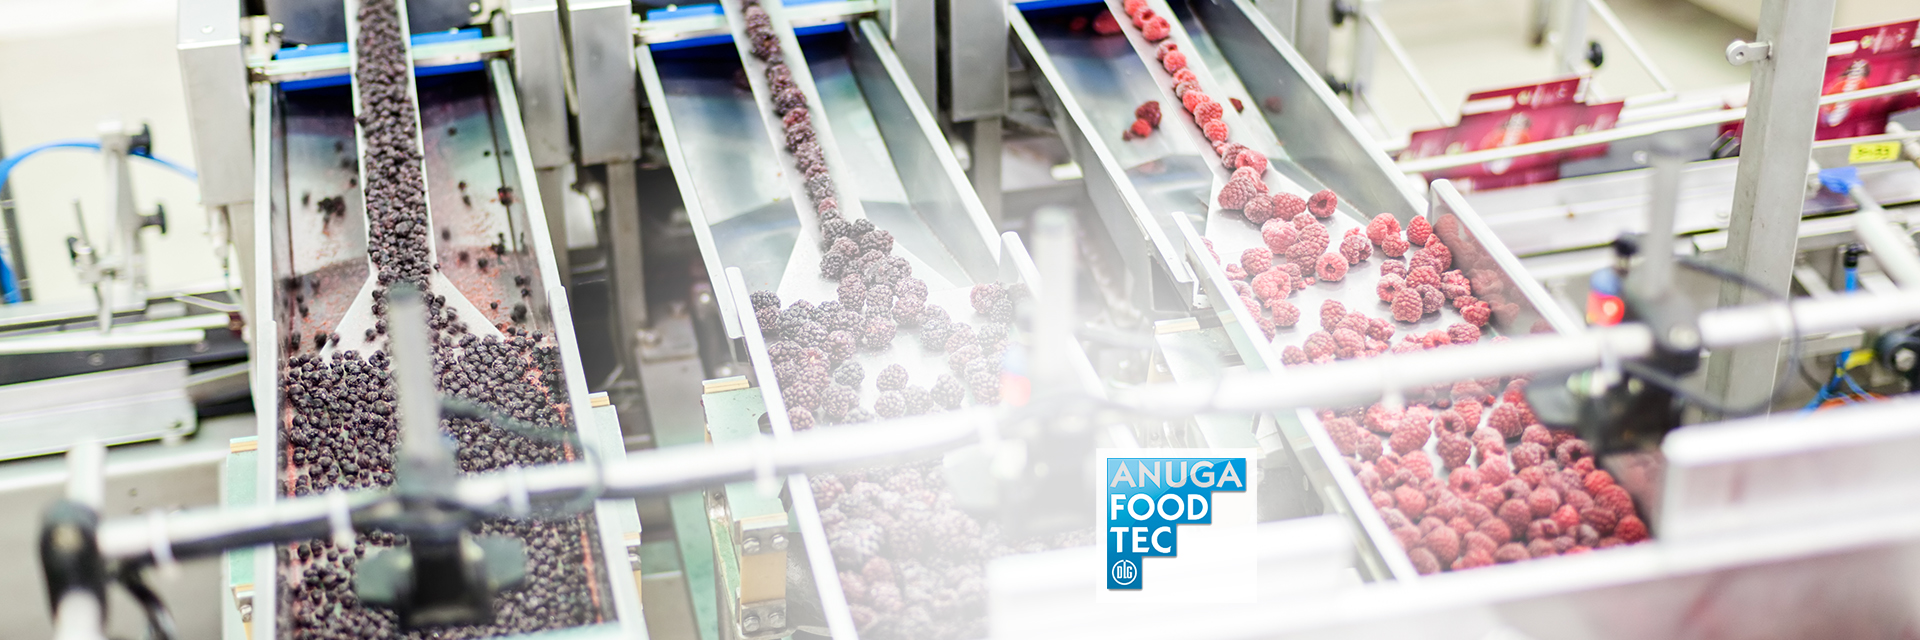 image of the processing of frozen berries in a food processing plant with the logo of the Anuga Food Tec